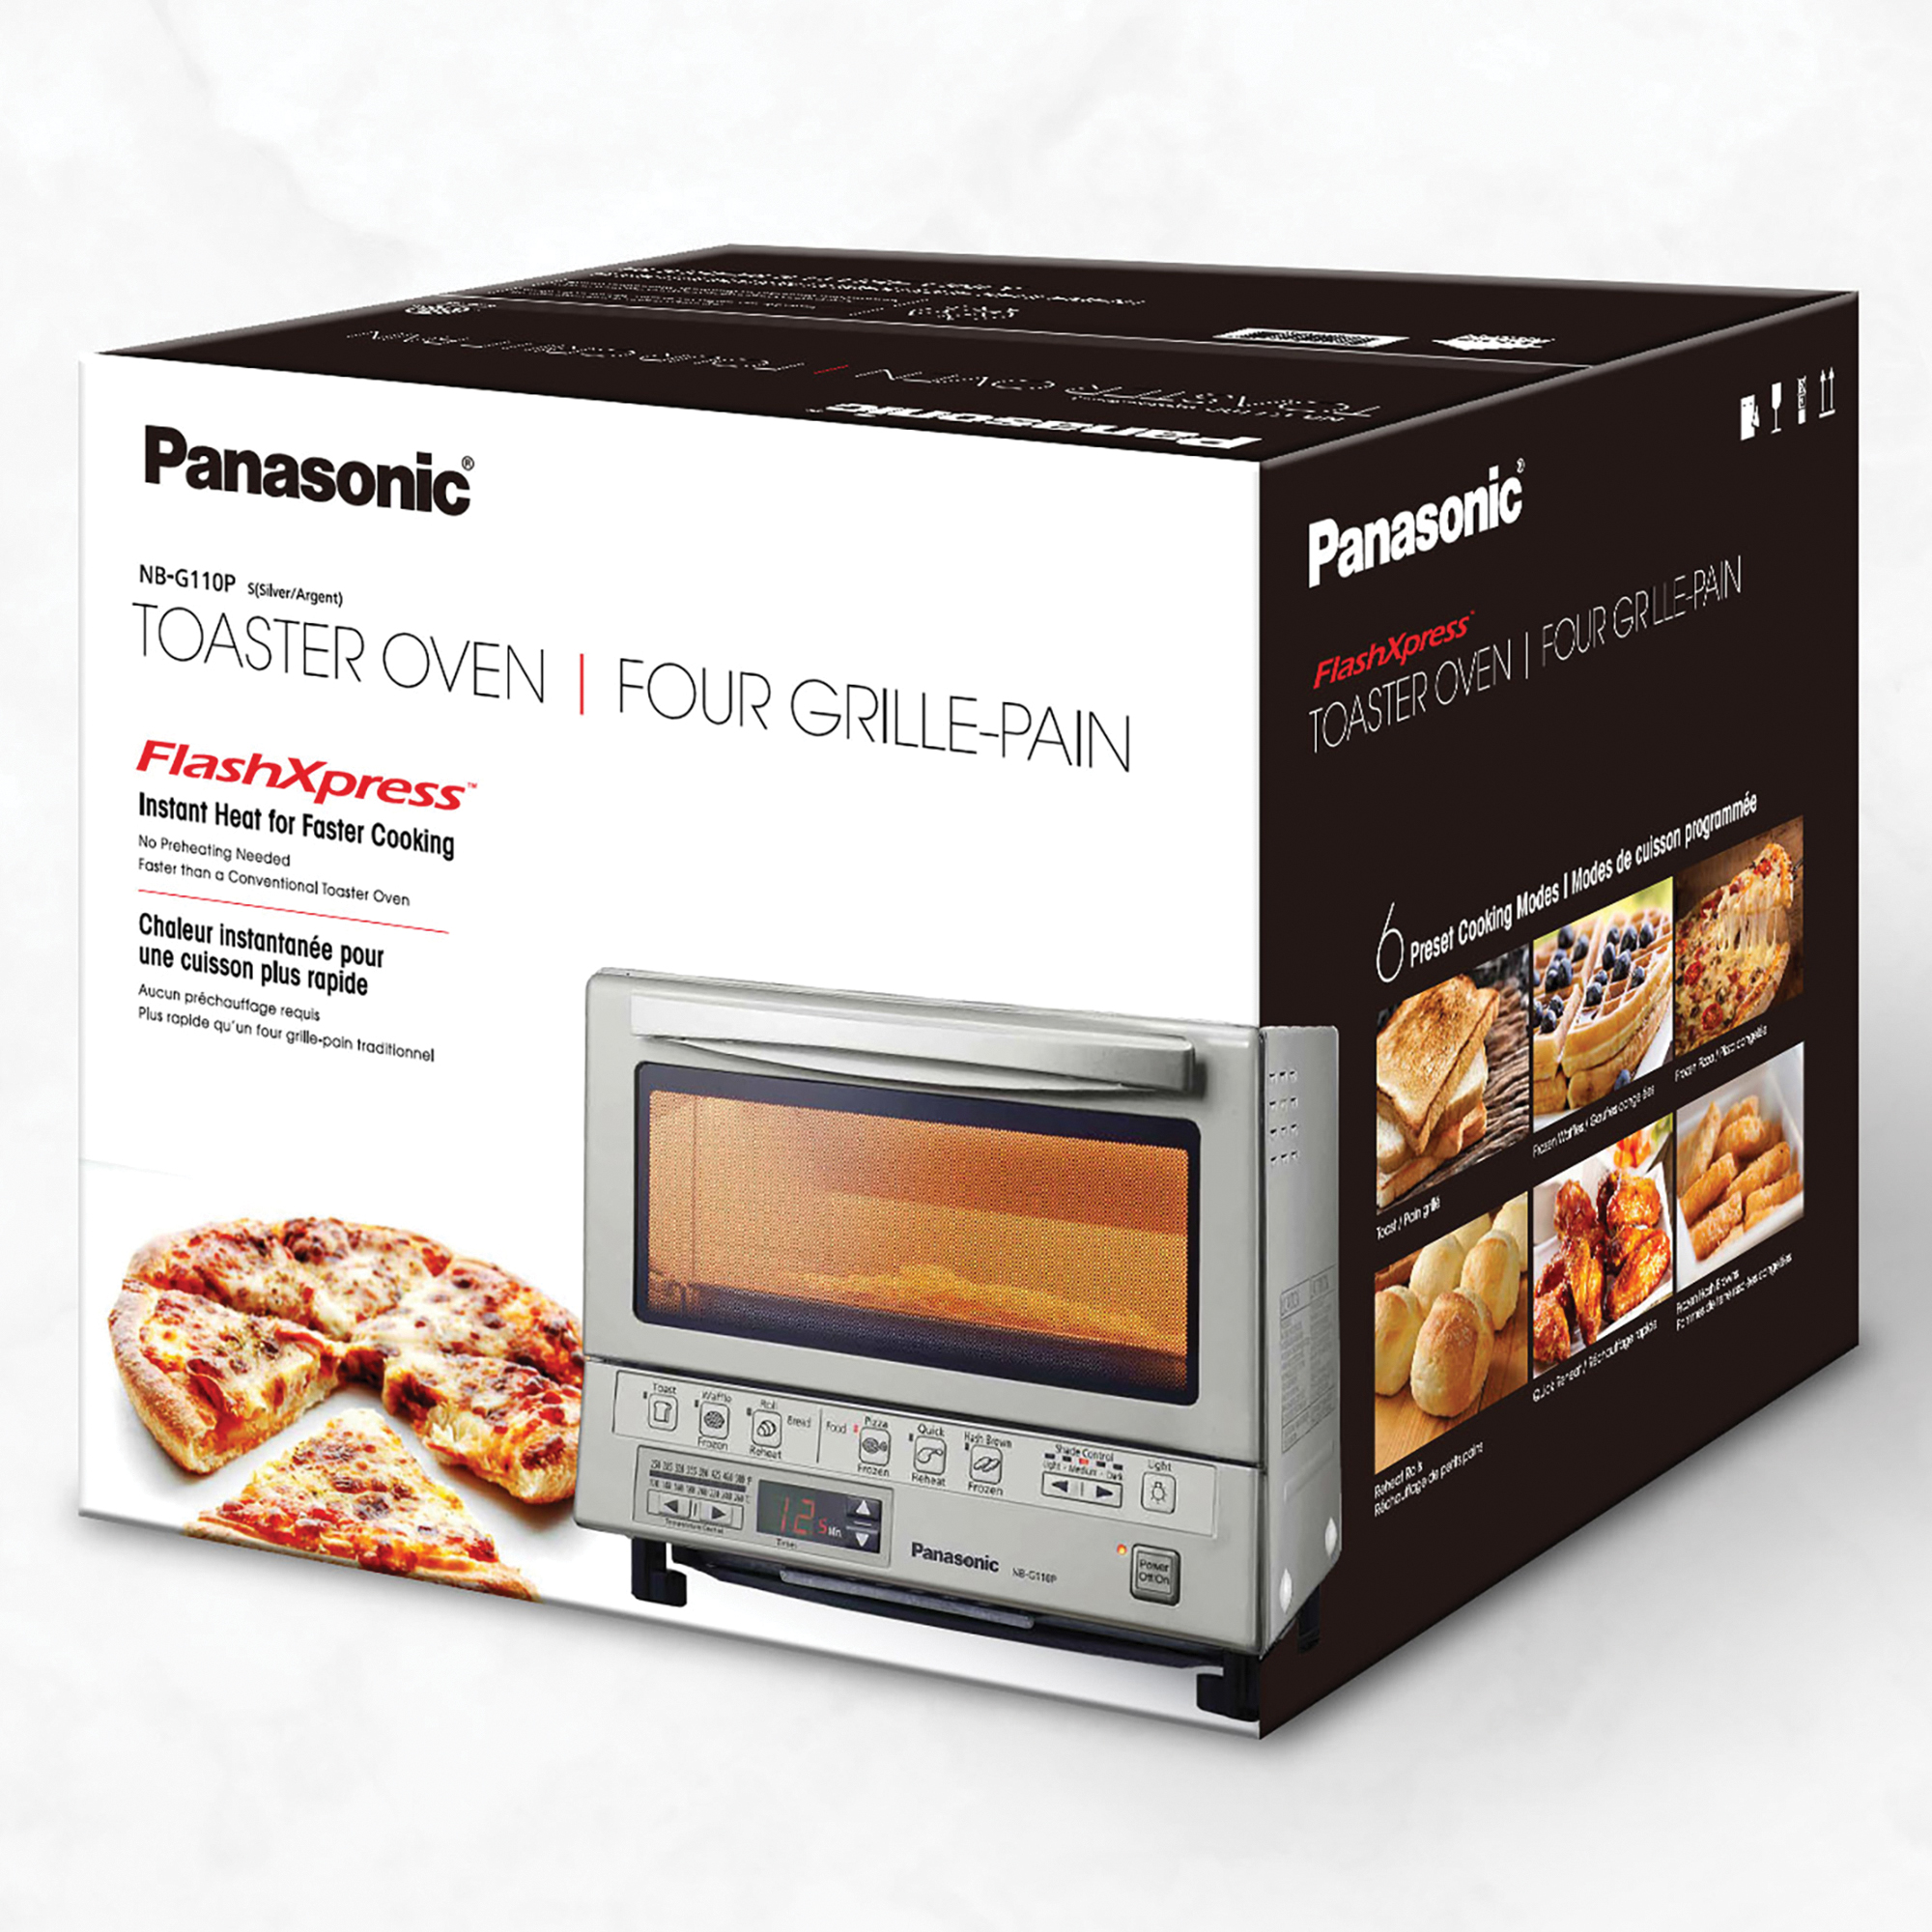 Panasonic FlashXpress Silver Toaster Oven in Silver - image 5 of 9